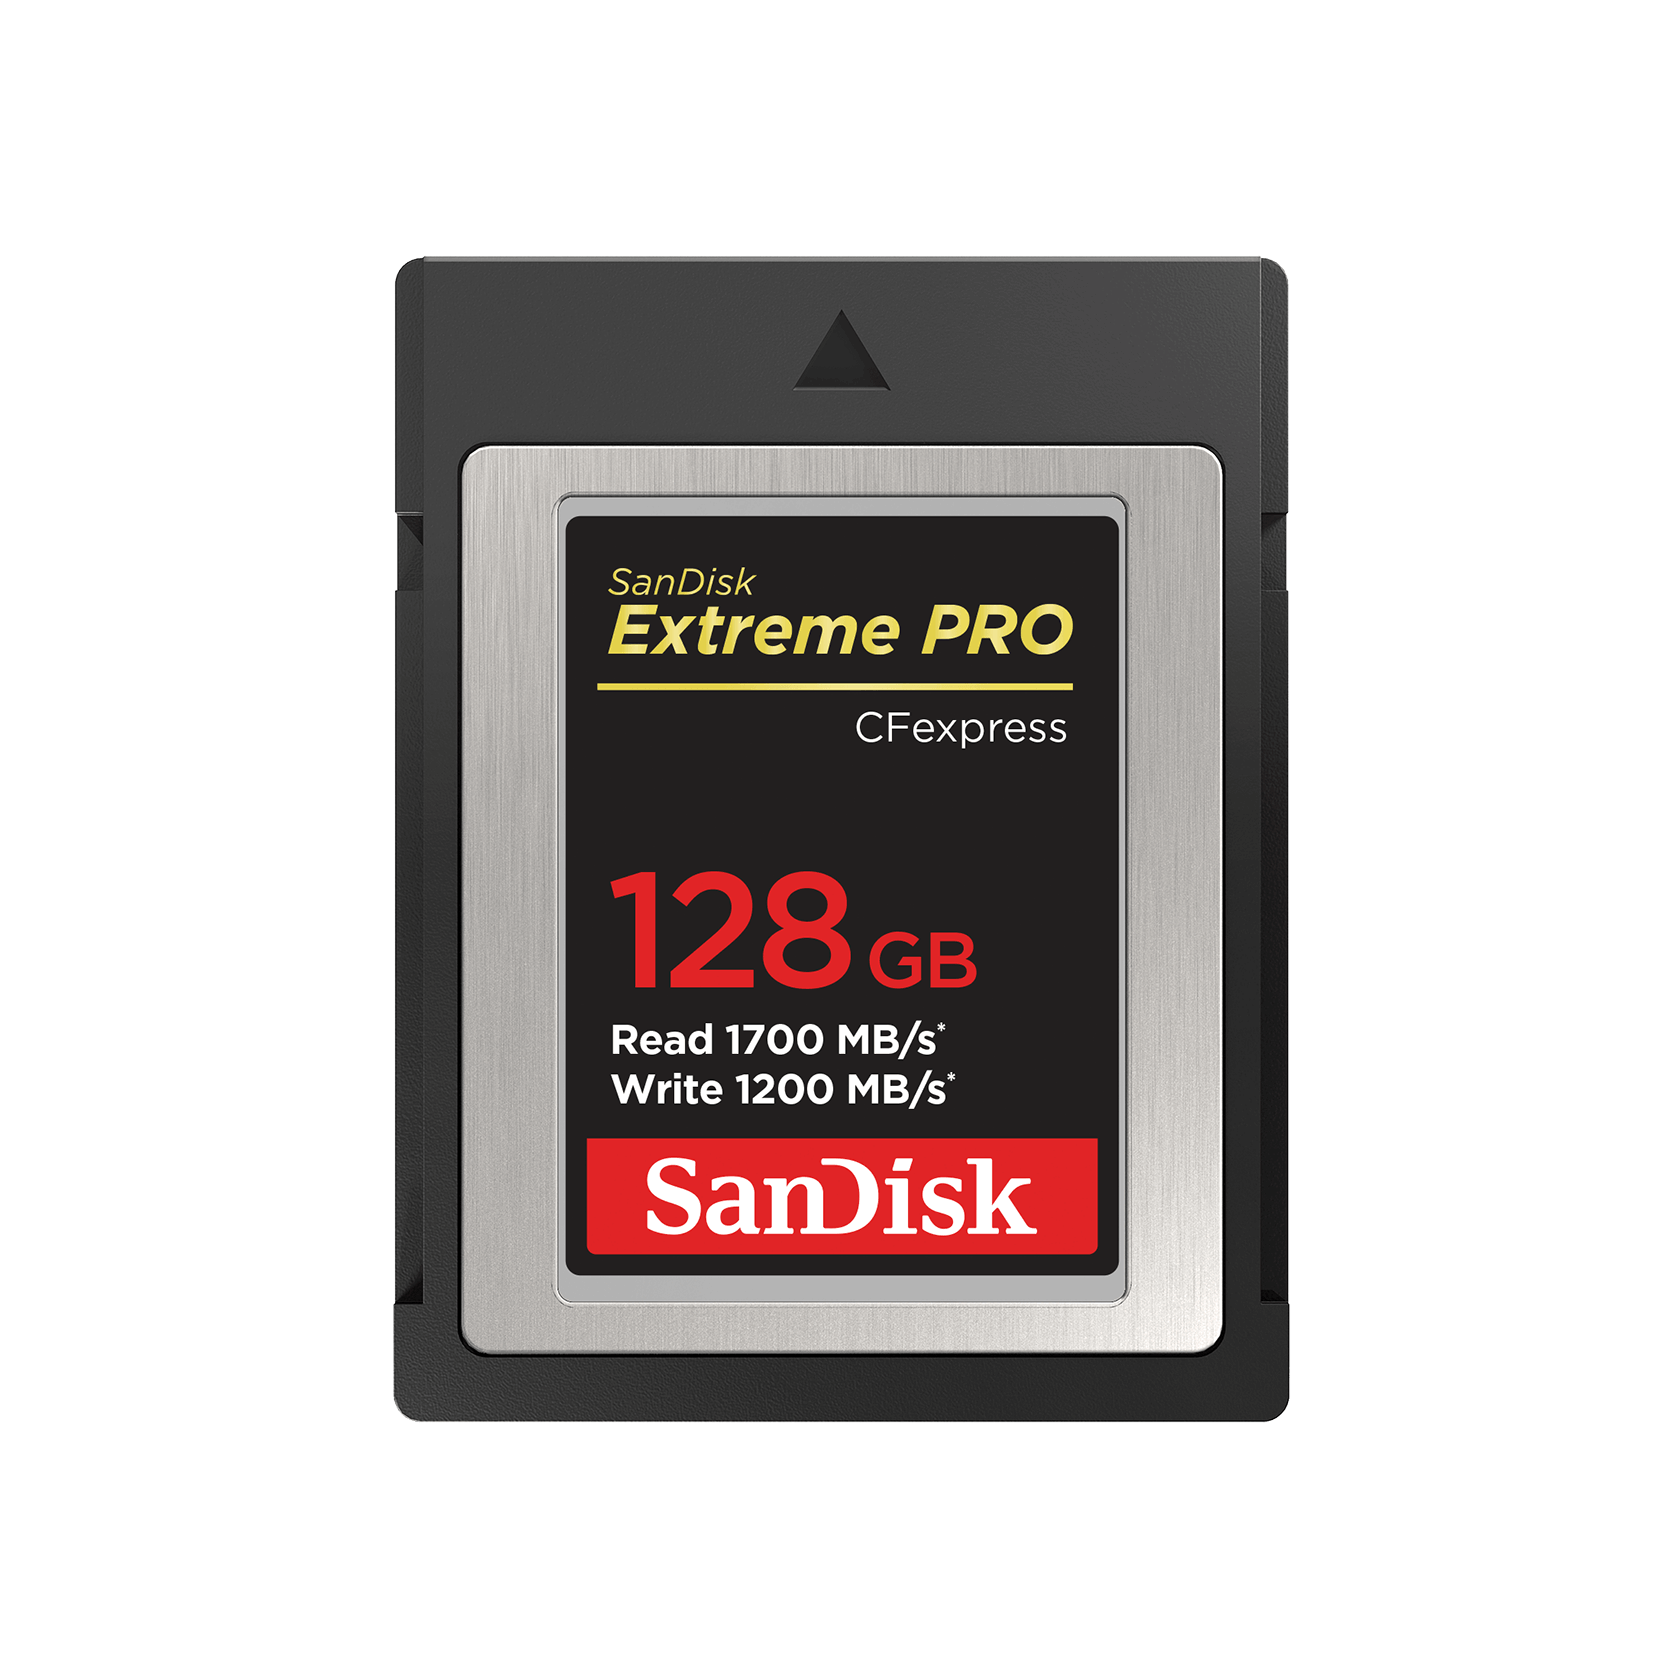 SanDisk Extreme ProÂ® CFexpressÂ® Memory Card Type B 128GB - SDCFE-128G-GN4NN